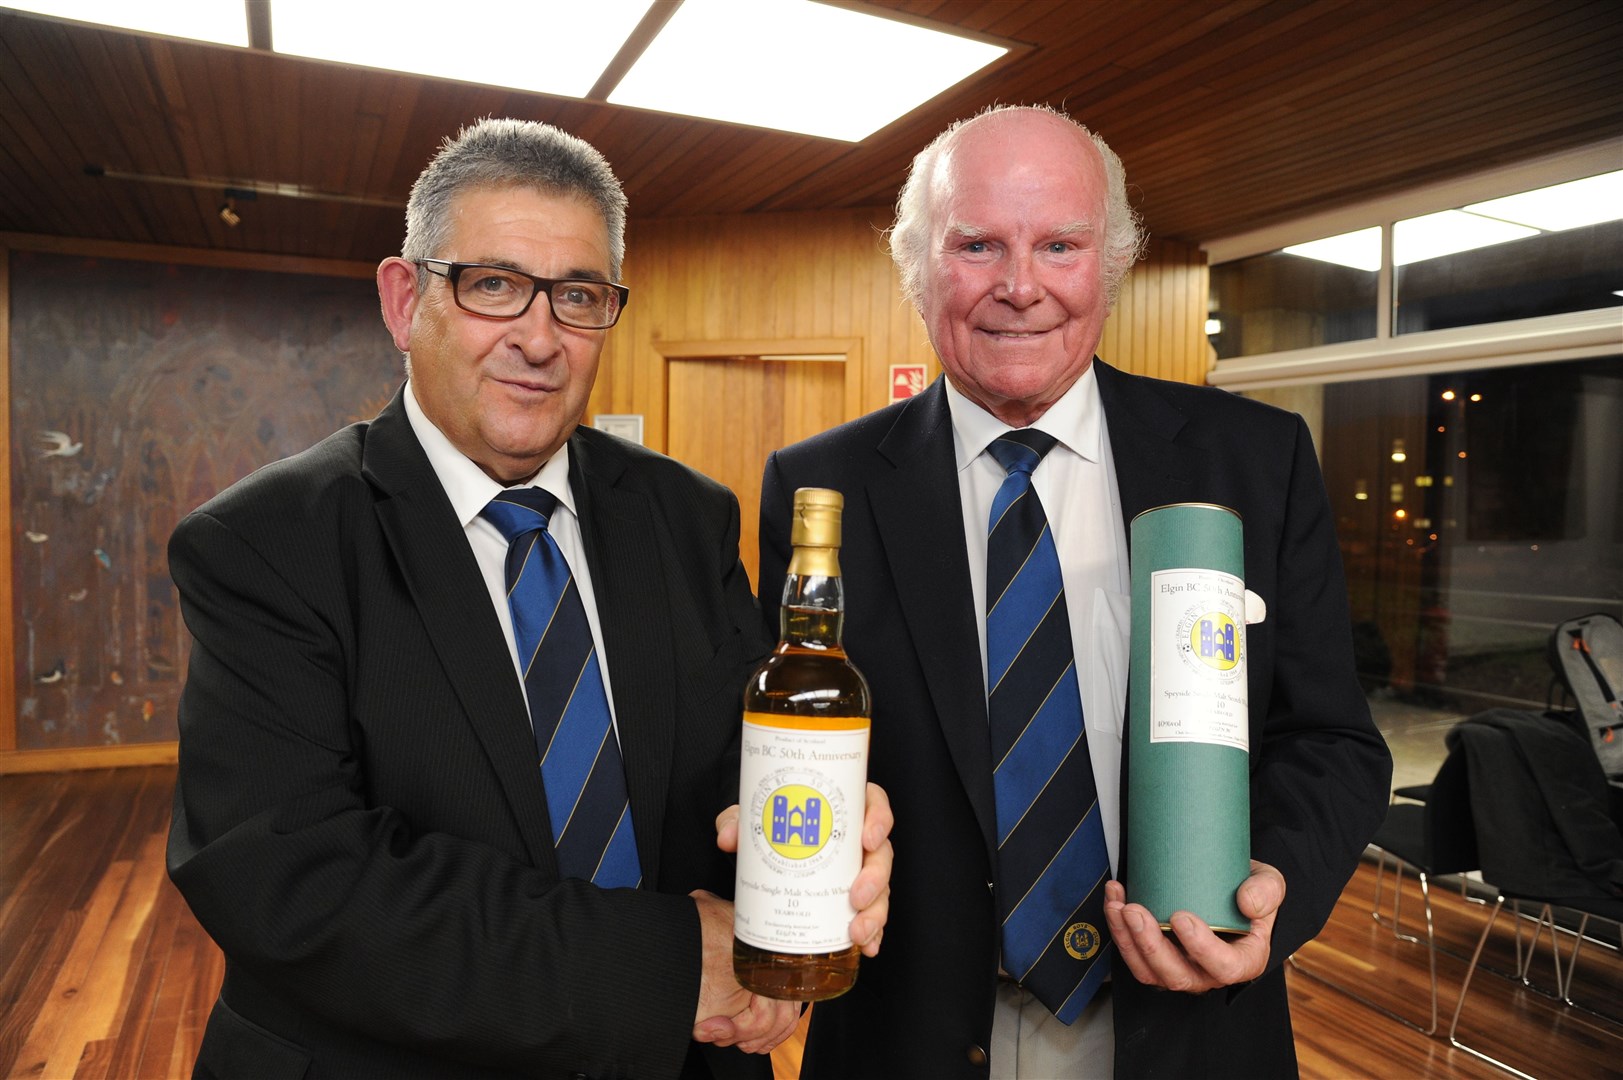 Graeme "Tiger" Porter presents Mike Christie with a bottle of whisky to commemorate his 50 years service with Elgin Boys Club.